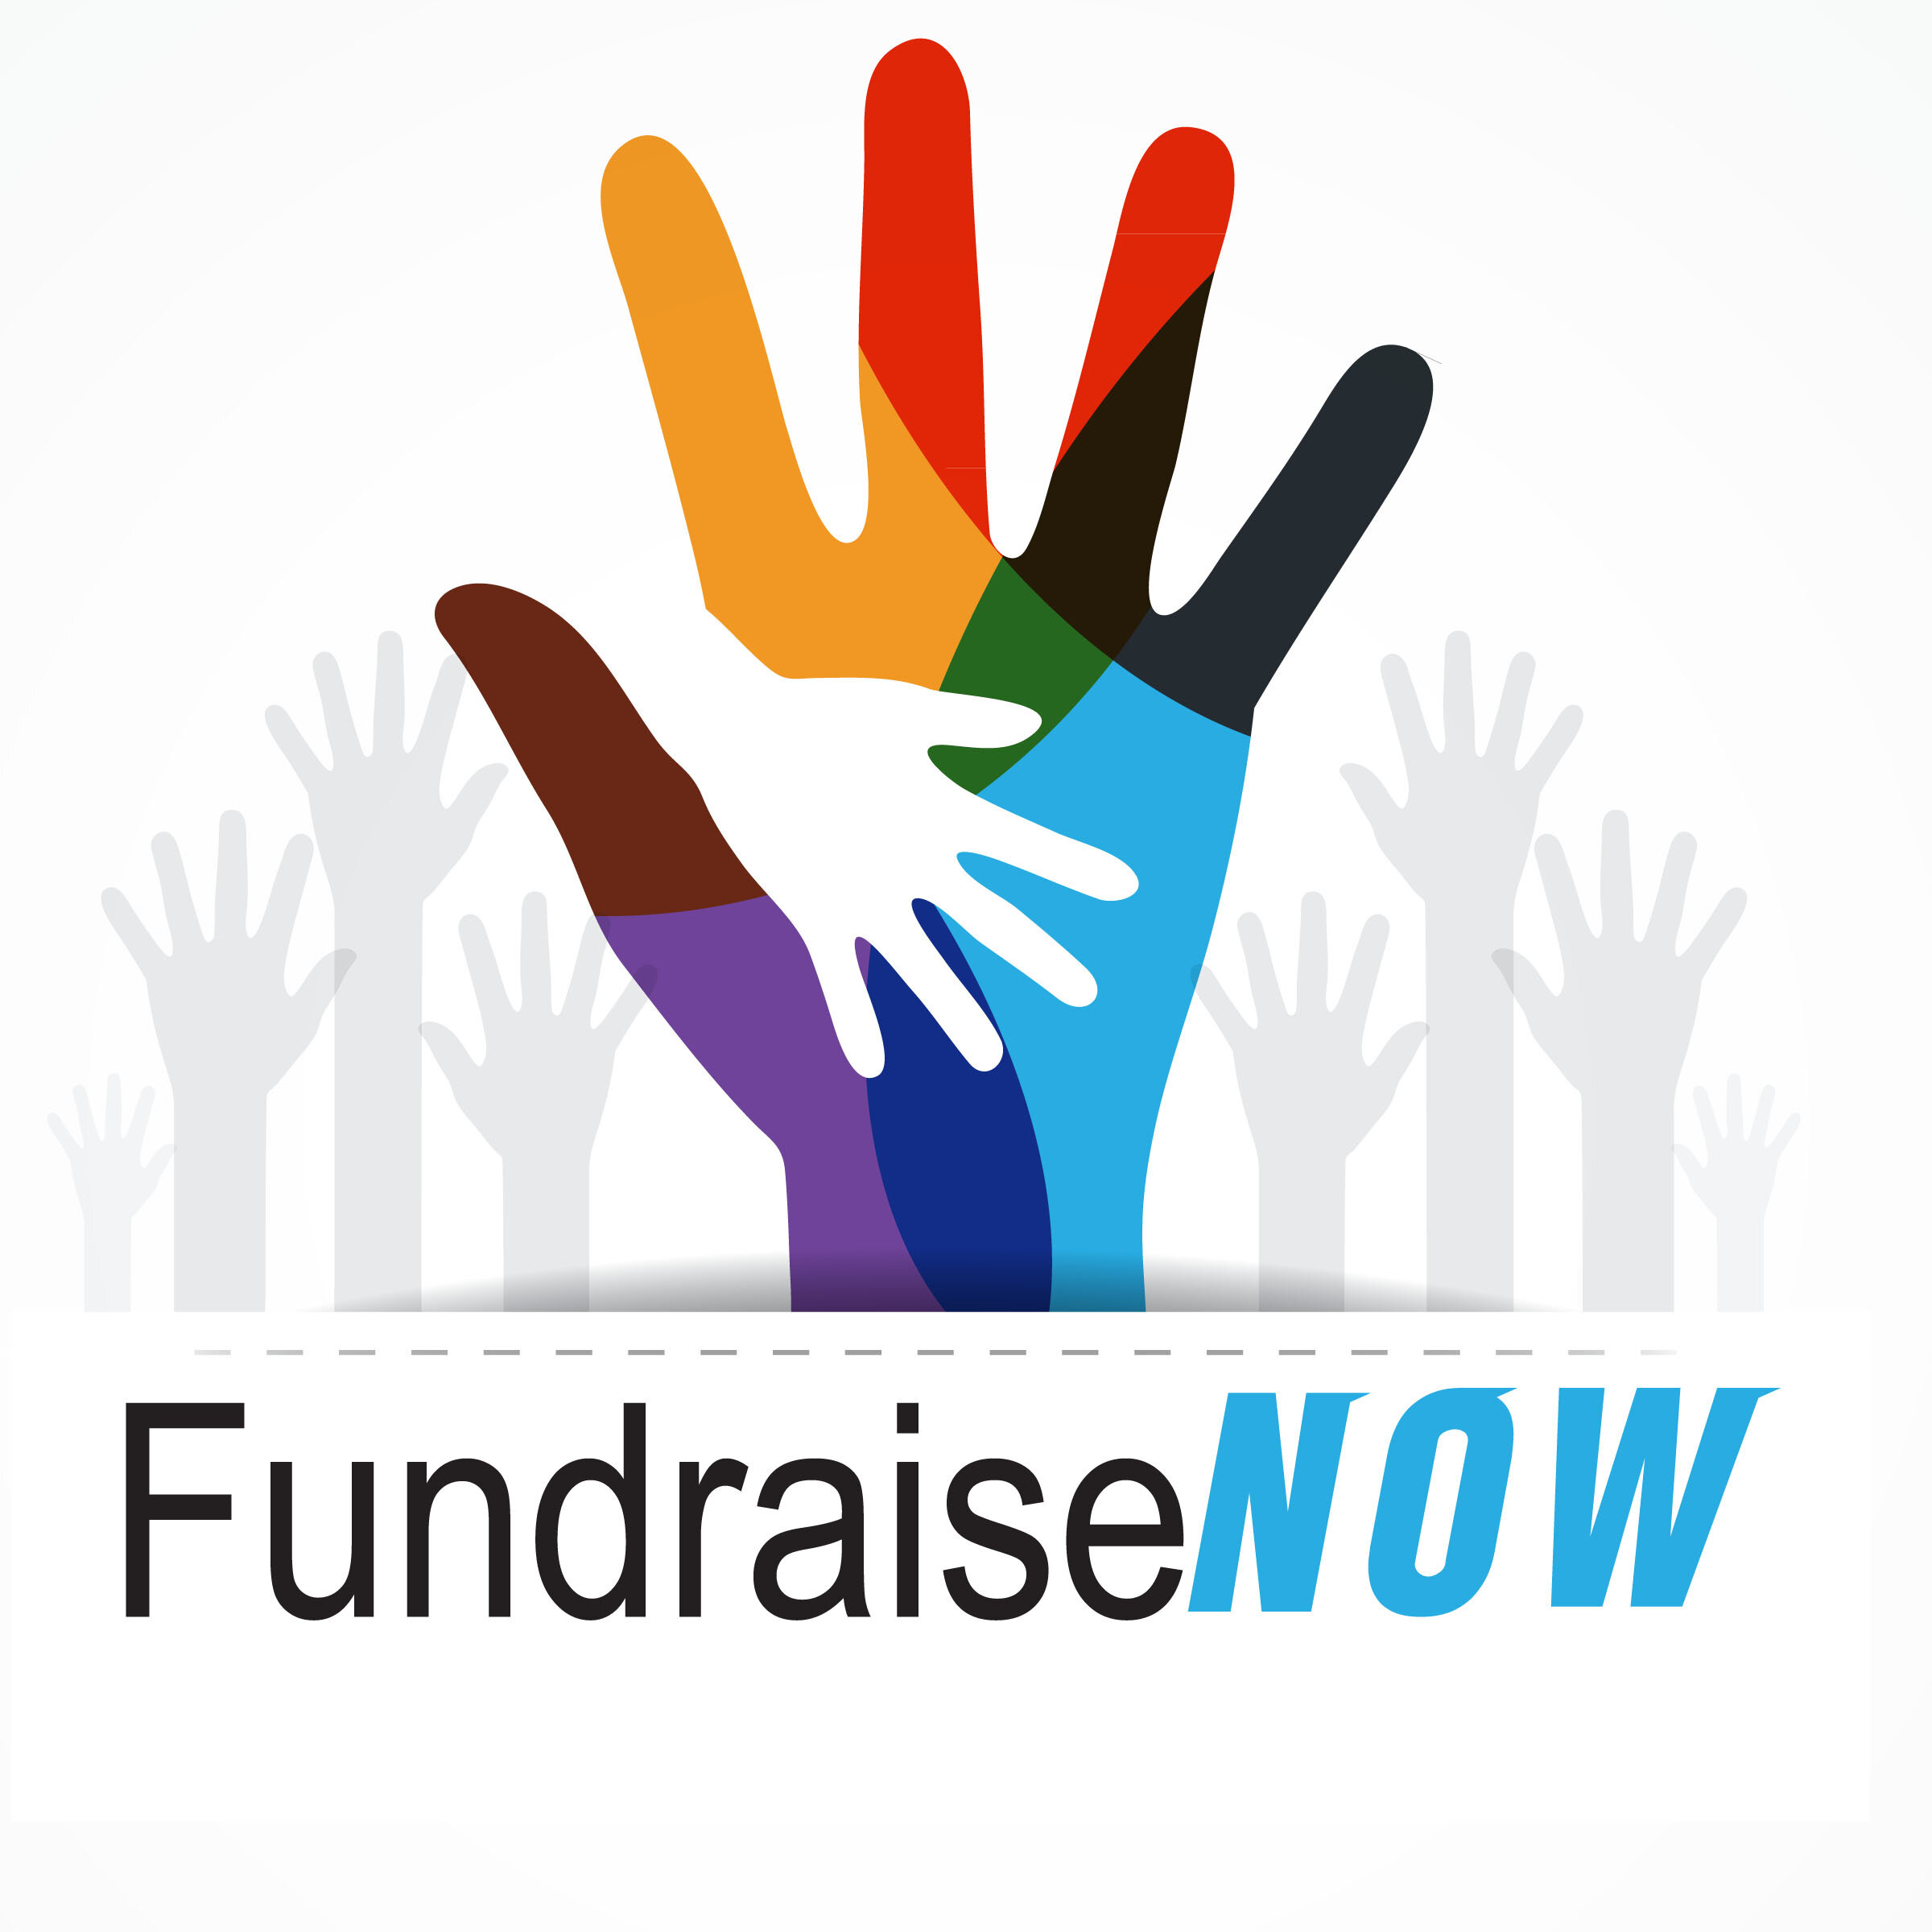 Fundraise NOW!